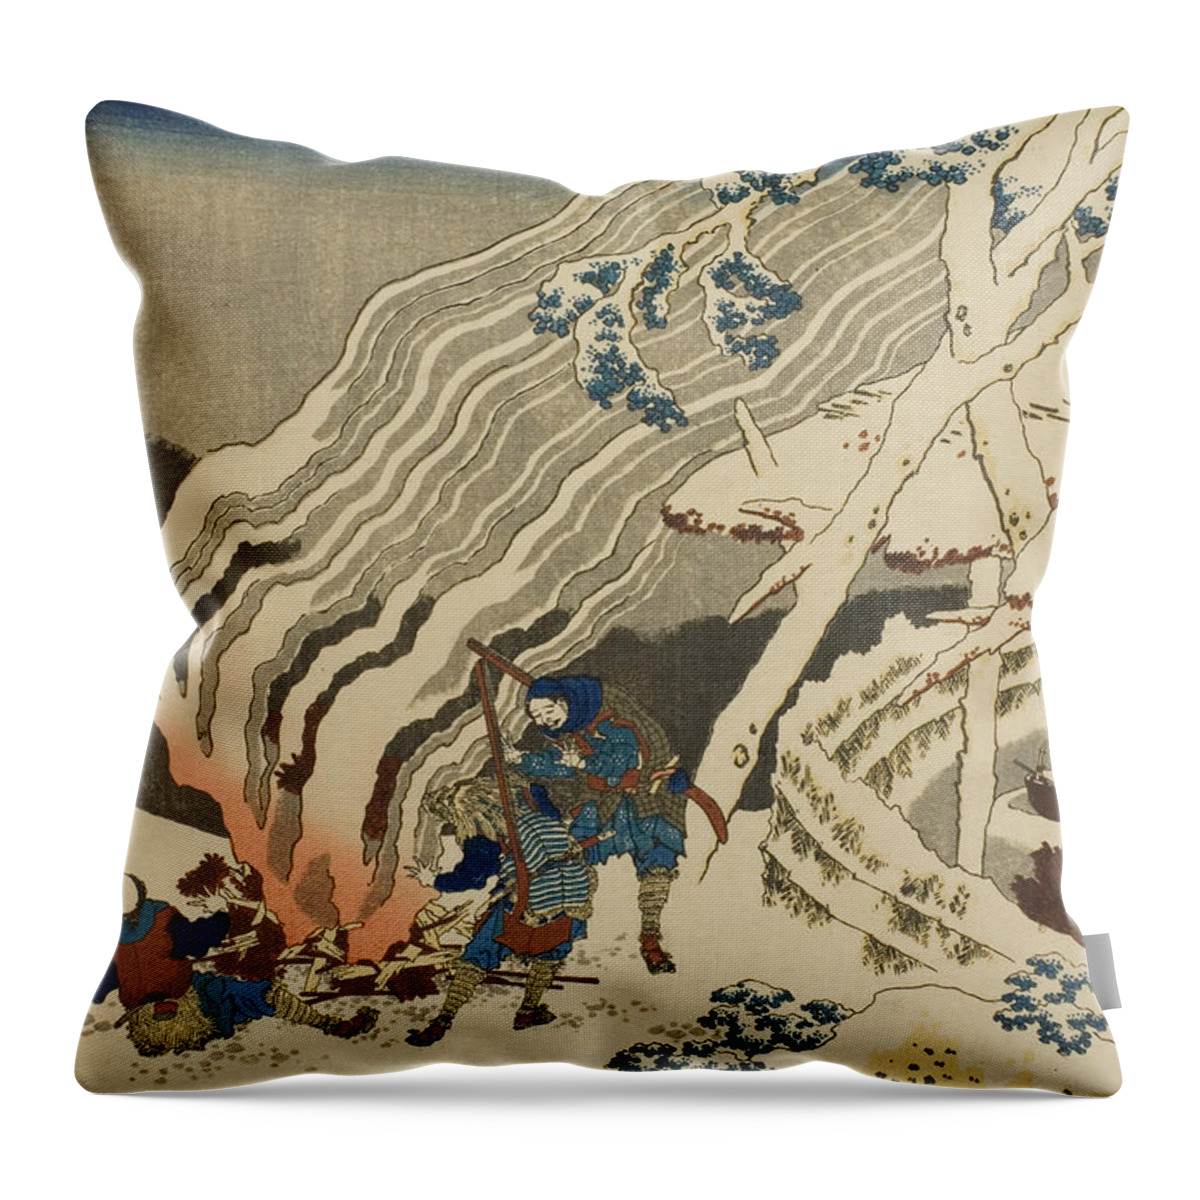 19th Century Art Throw Pillow featuring the relief Poem by Minamoto no Muneyuki Ason, from the series One Hundred Poems Explained by the Nurse by Katsushika Hokusai